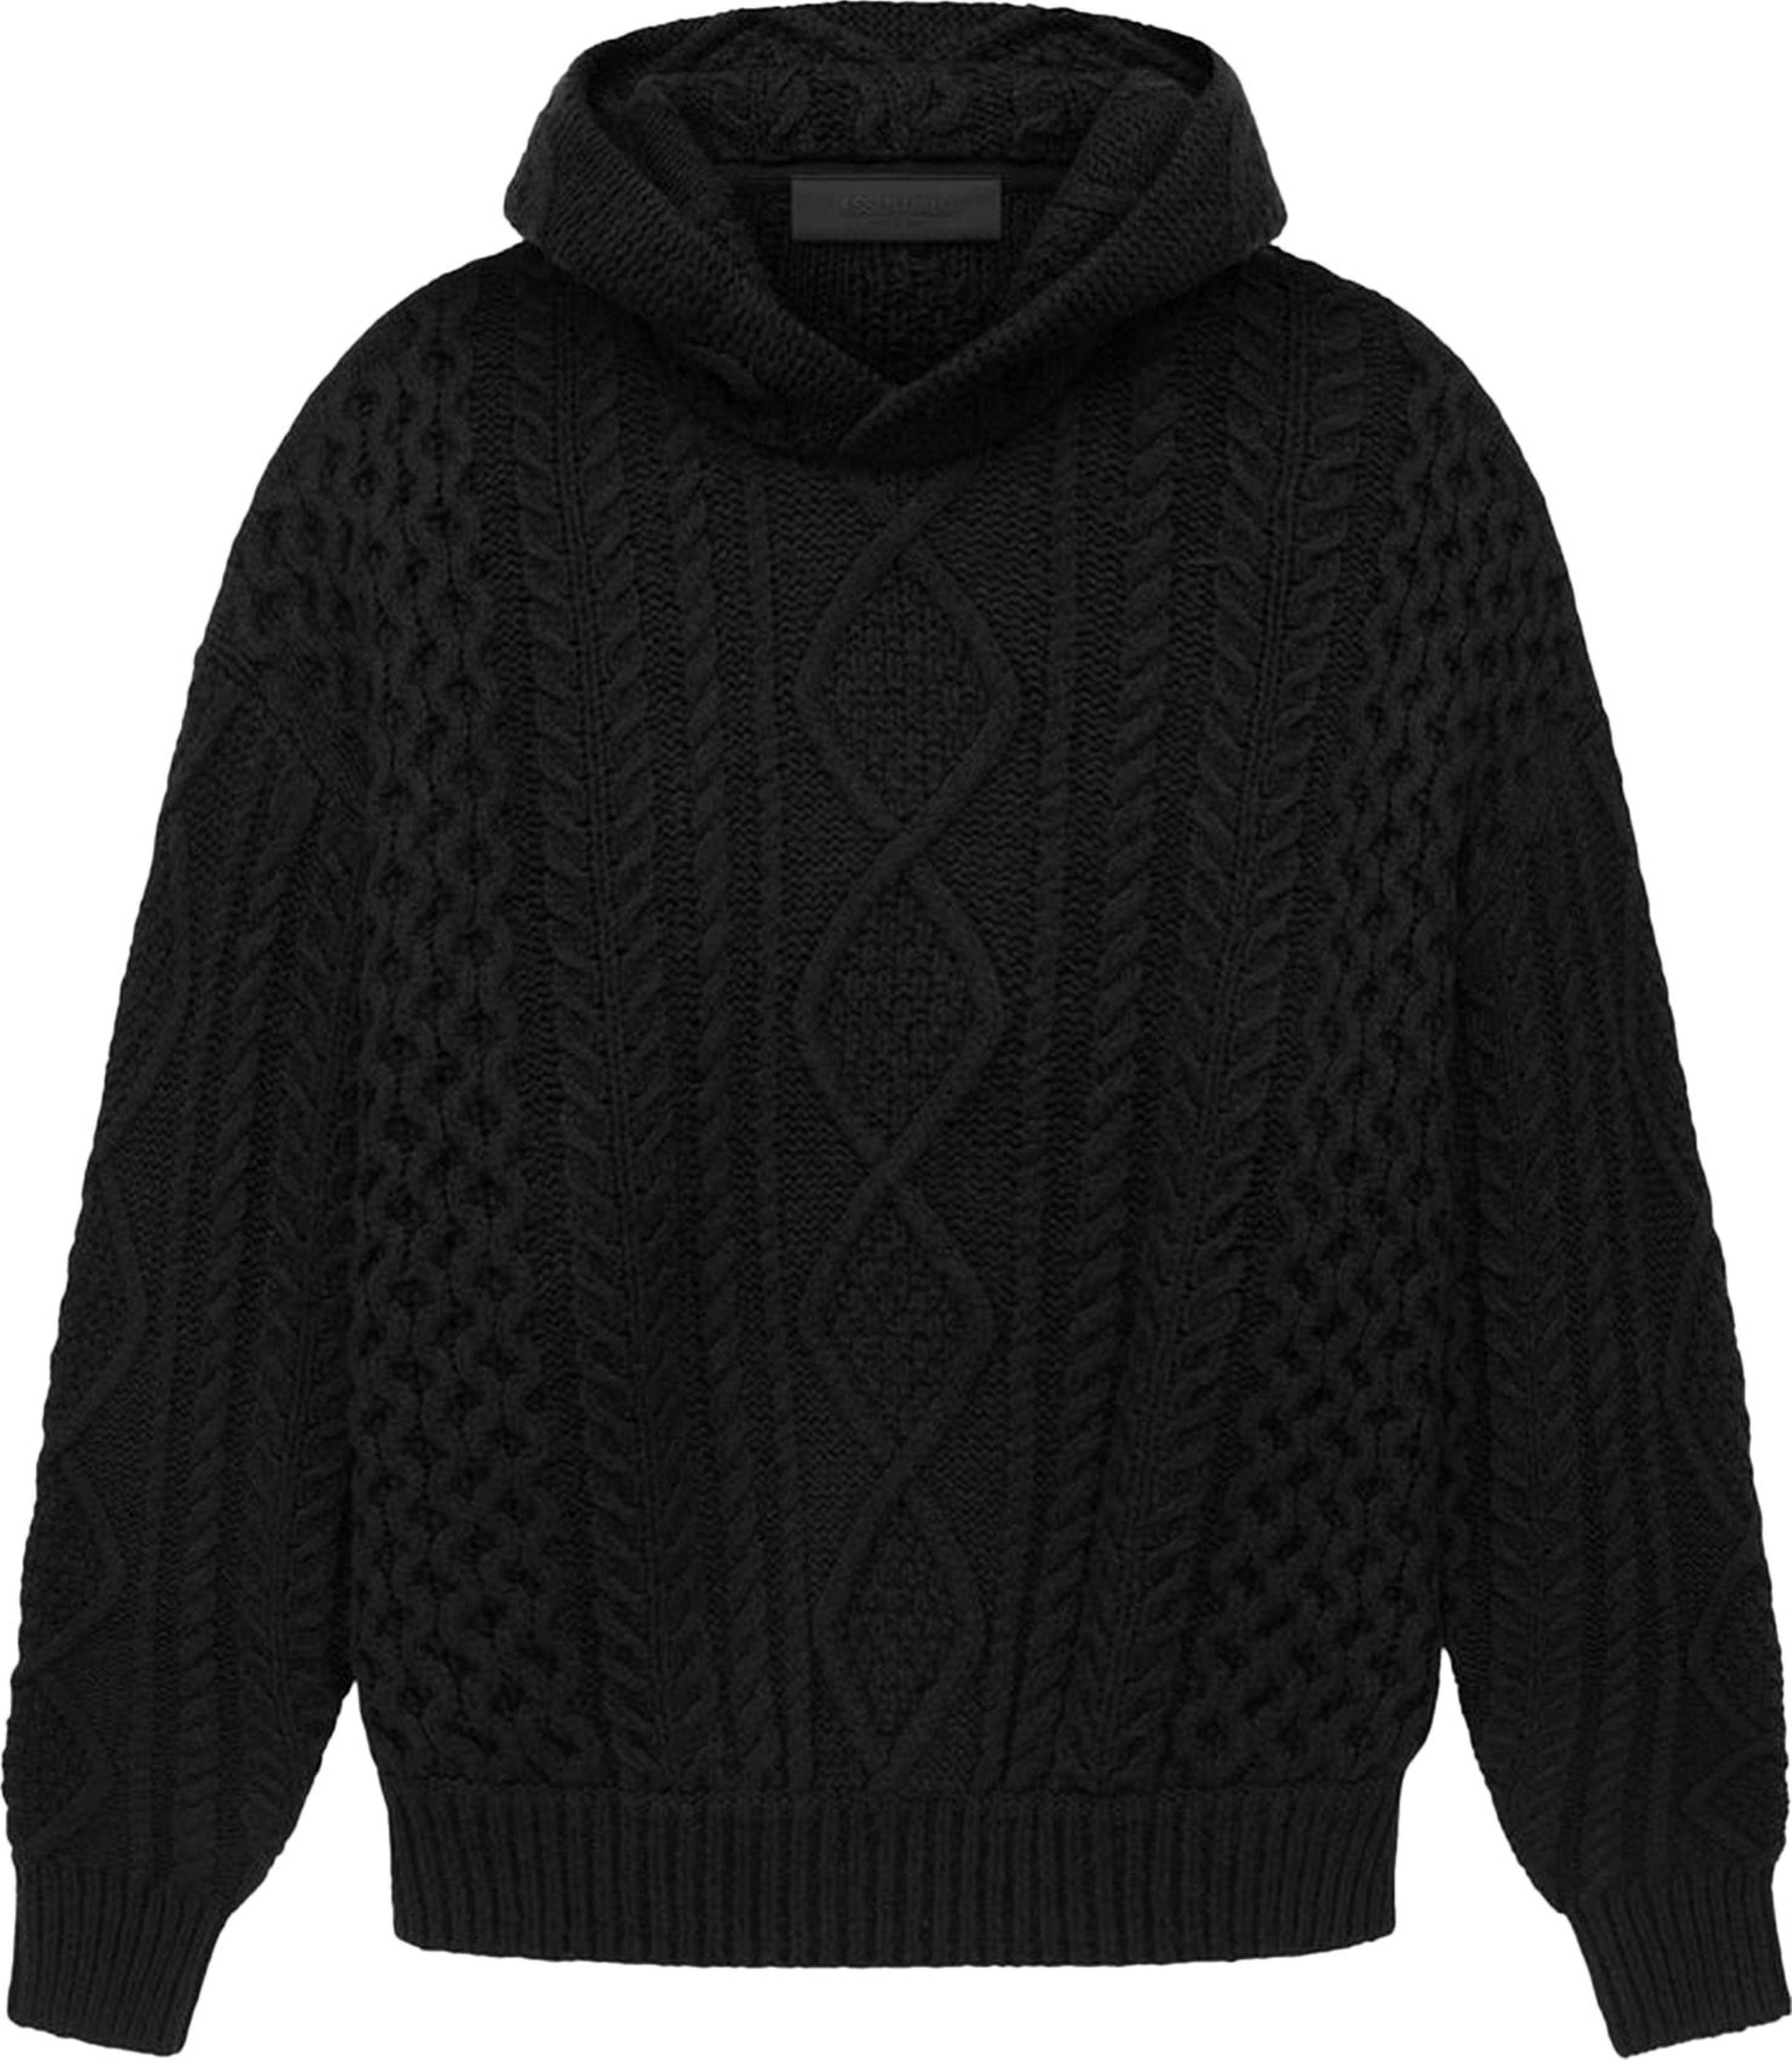 Buy Fear of God Essentials Cable Knit Hoodie 'Jet Black' 192SP234390F